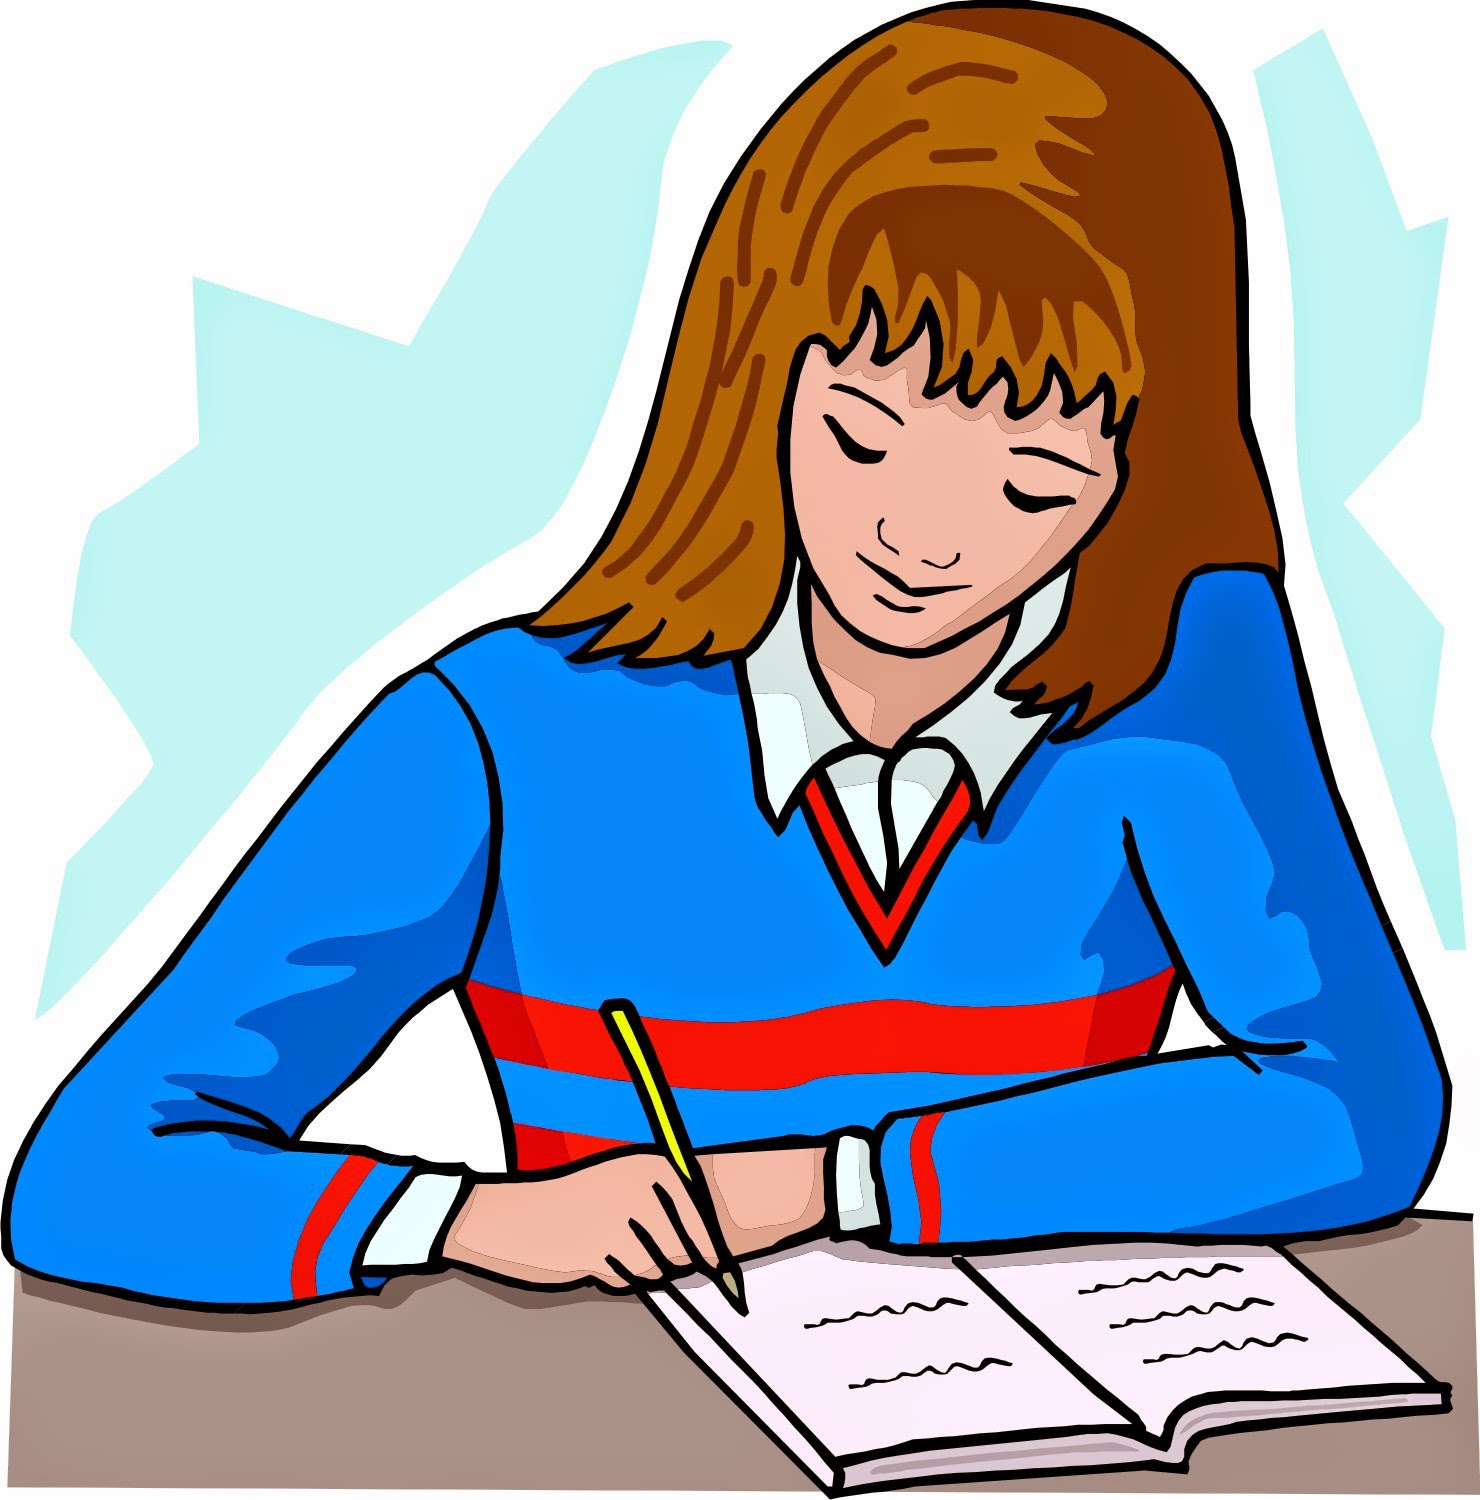 reflection clipart reflective learning